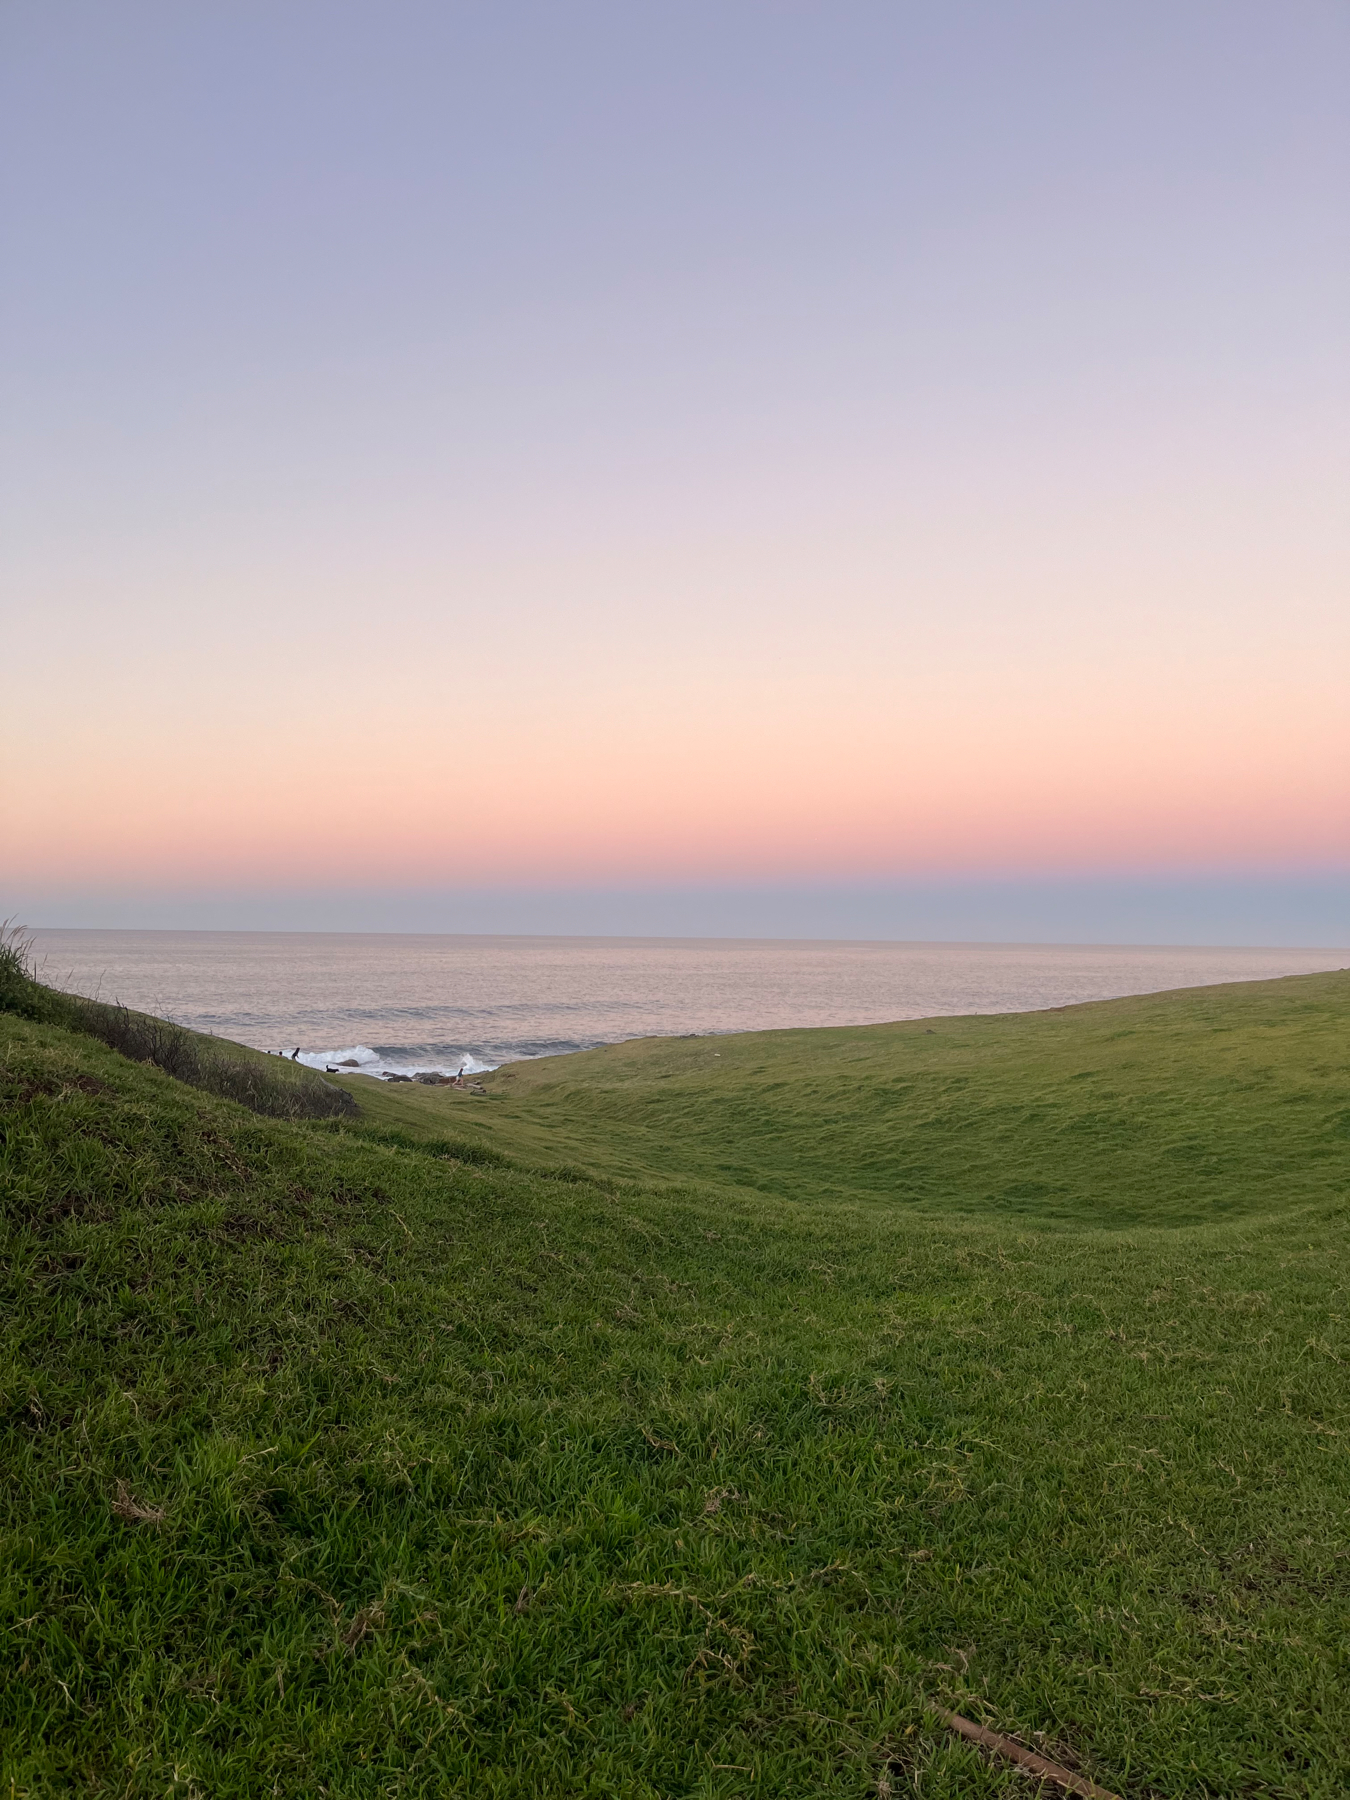 A tranquil sunset overlooking the ocean with a gradient sky, viewed from a grassy hillside.